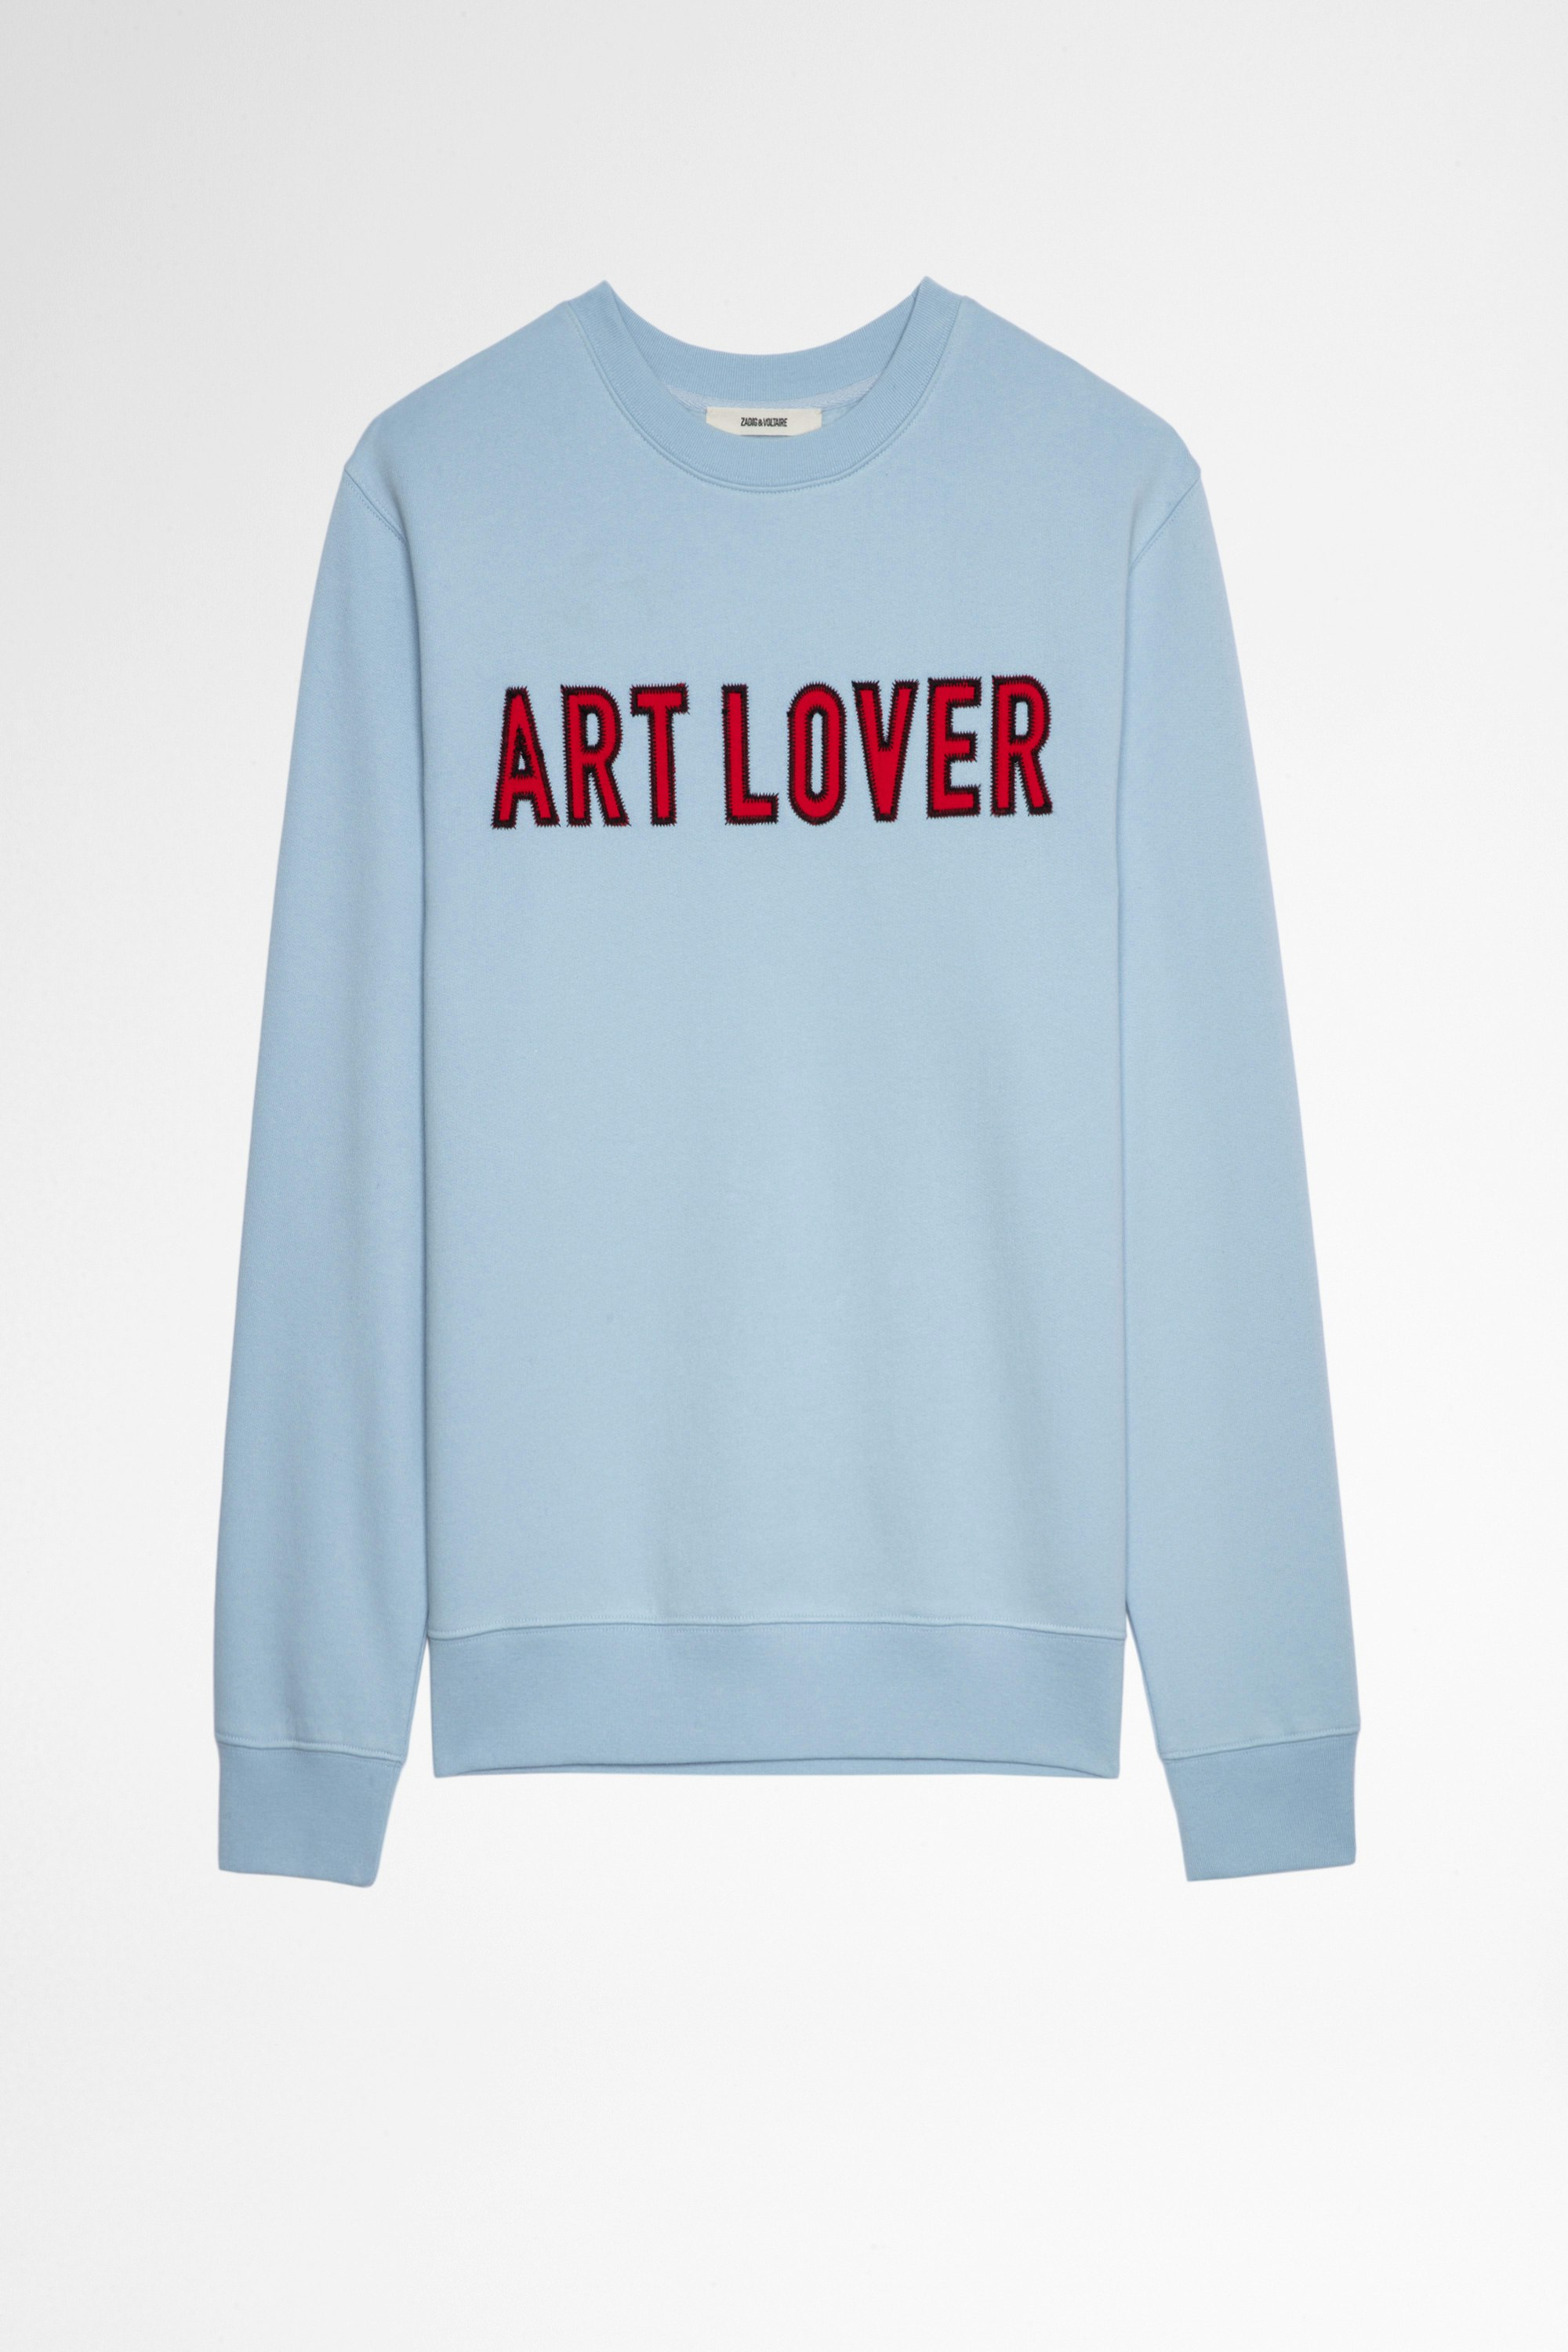 Simba Art Lover Sweatshirt Men's sky blue sweatshirt with Art Lover patch. This product is GOTS certified and made with fibers from organic farming.